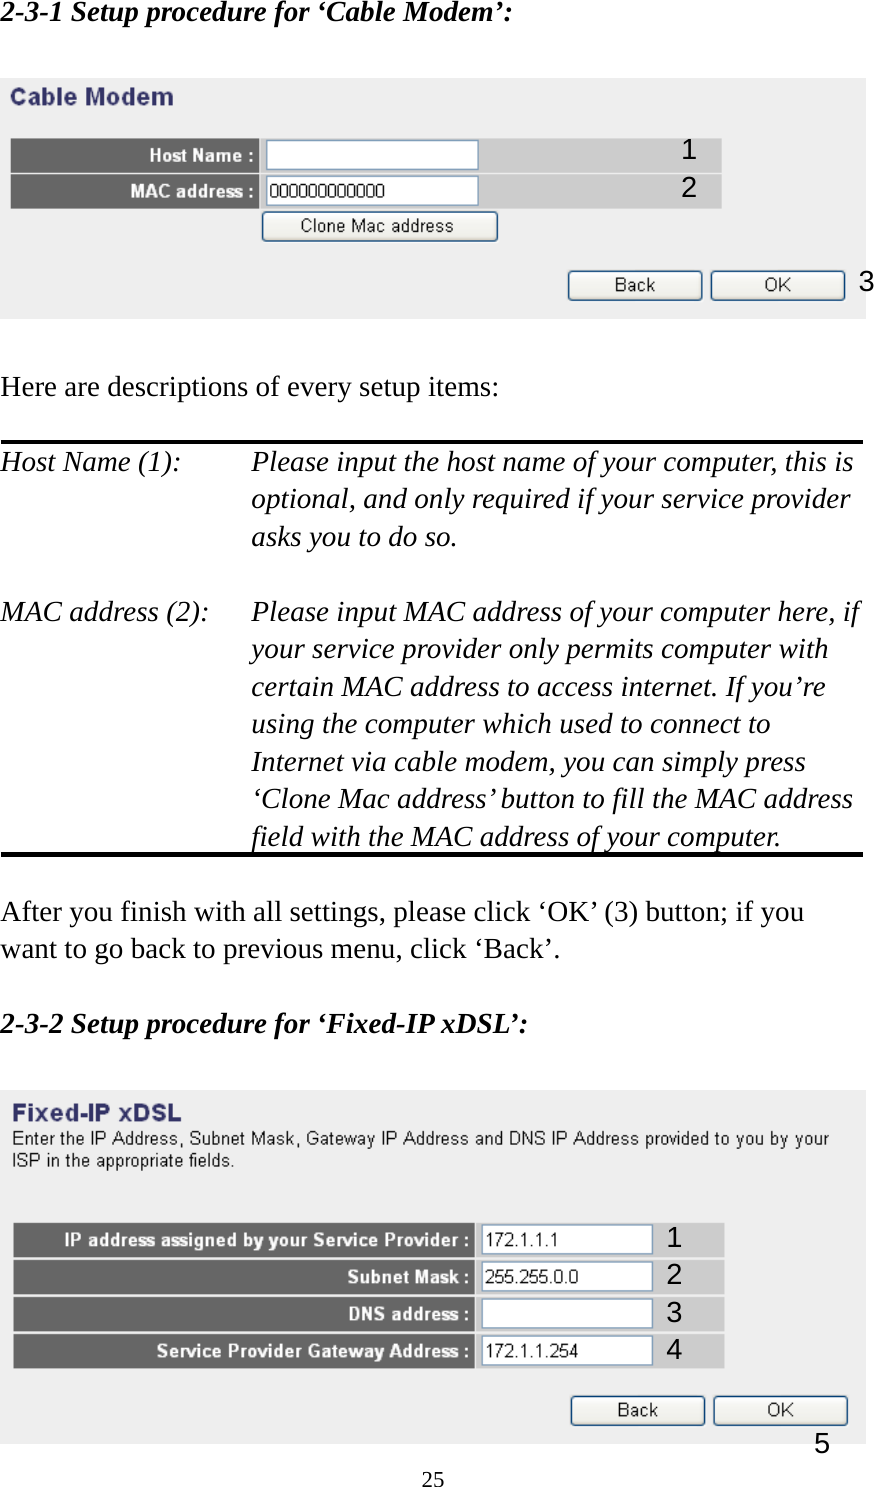 25 2-3-1 Setup procedure for ‘Cable Modem’:    Here are descriptions of every setup items:  Host Name (1):     Please input the host name of your computer, this is         optional, and only required if your service provider             asks you to do so.    MAC address (2):    Please input MAC address of your computer here, if your service provider only permits computer with certain MAC address to access internet. If you’re using the computer which used to connect to Internet via cable modem, you can simply press ‘Clone Mac address’ button to fill the MAC address field with the MAC address of your computer.  After you finish with all settings, please click ‘OK’ (3) button; if you want to go back to previous menu, click ‘Back’.    2-3-2 Setup procedure for ‘Fixed-IP xDSL’:   1 2 3 1 2 3 4 5 